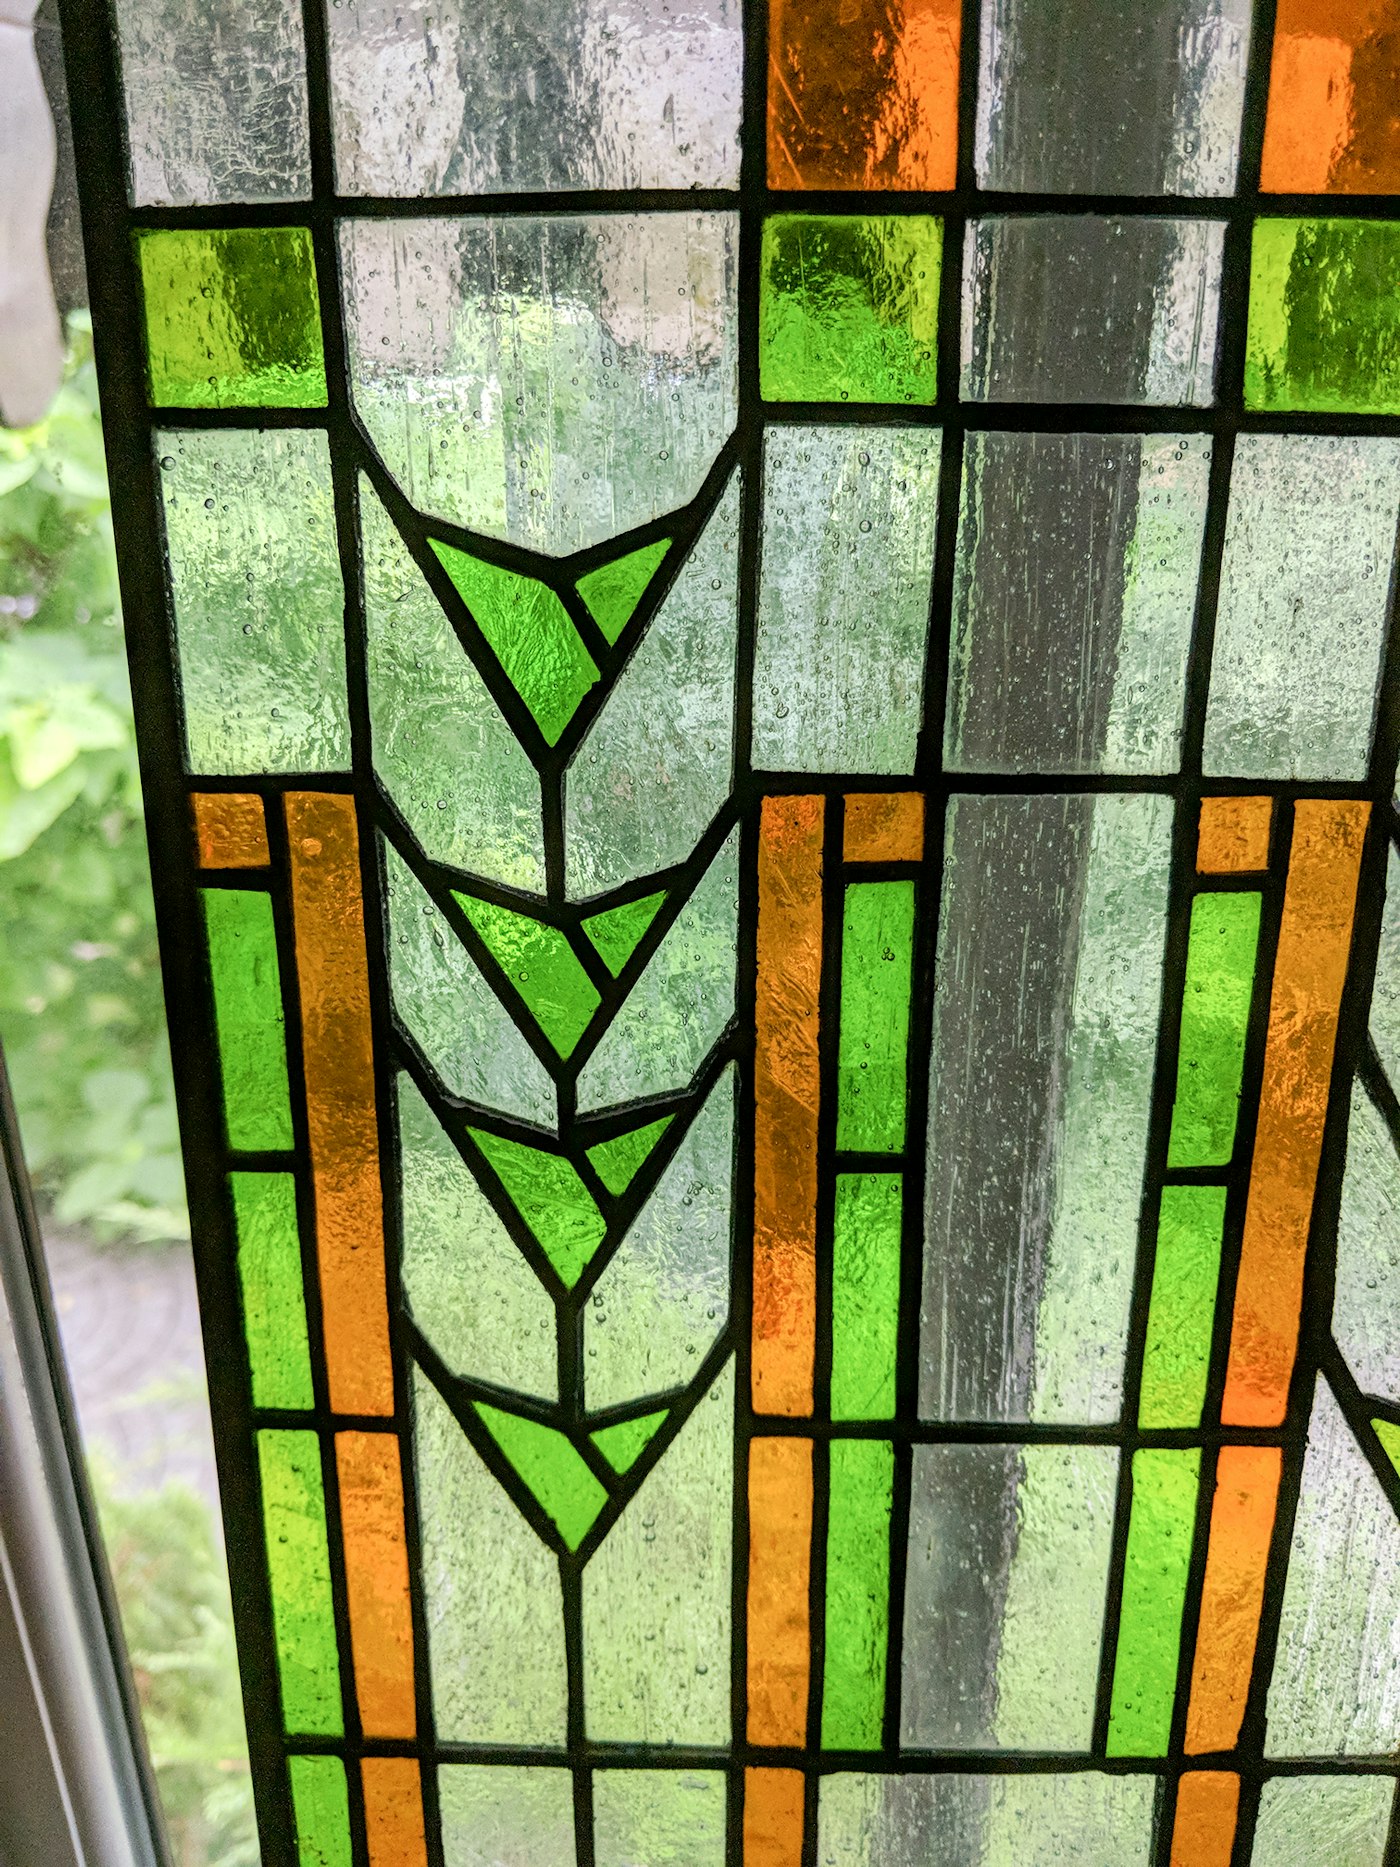 Frank Lloyd Wright Reproduction Stained Glass Panel | EBTH